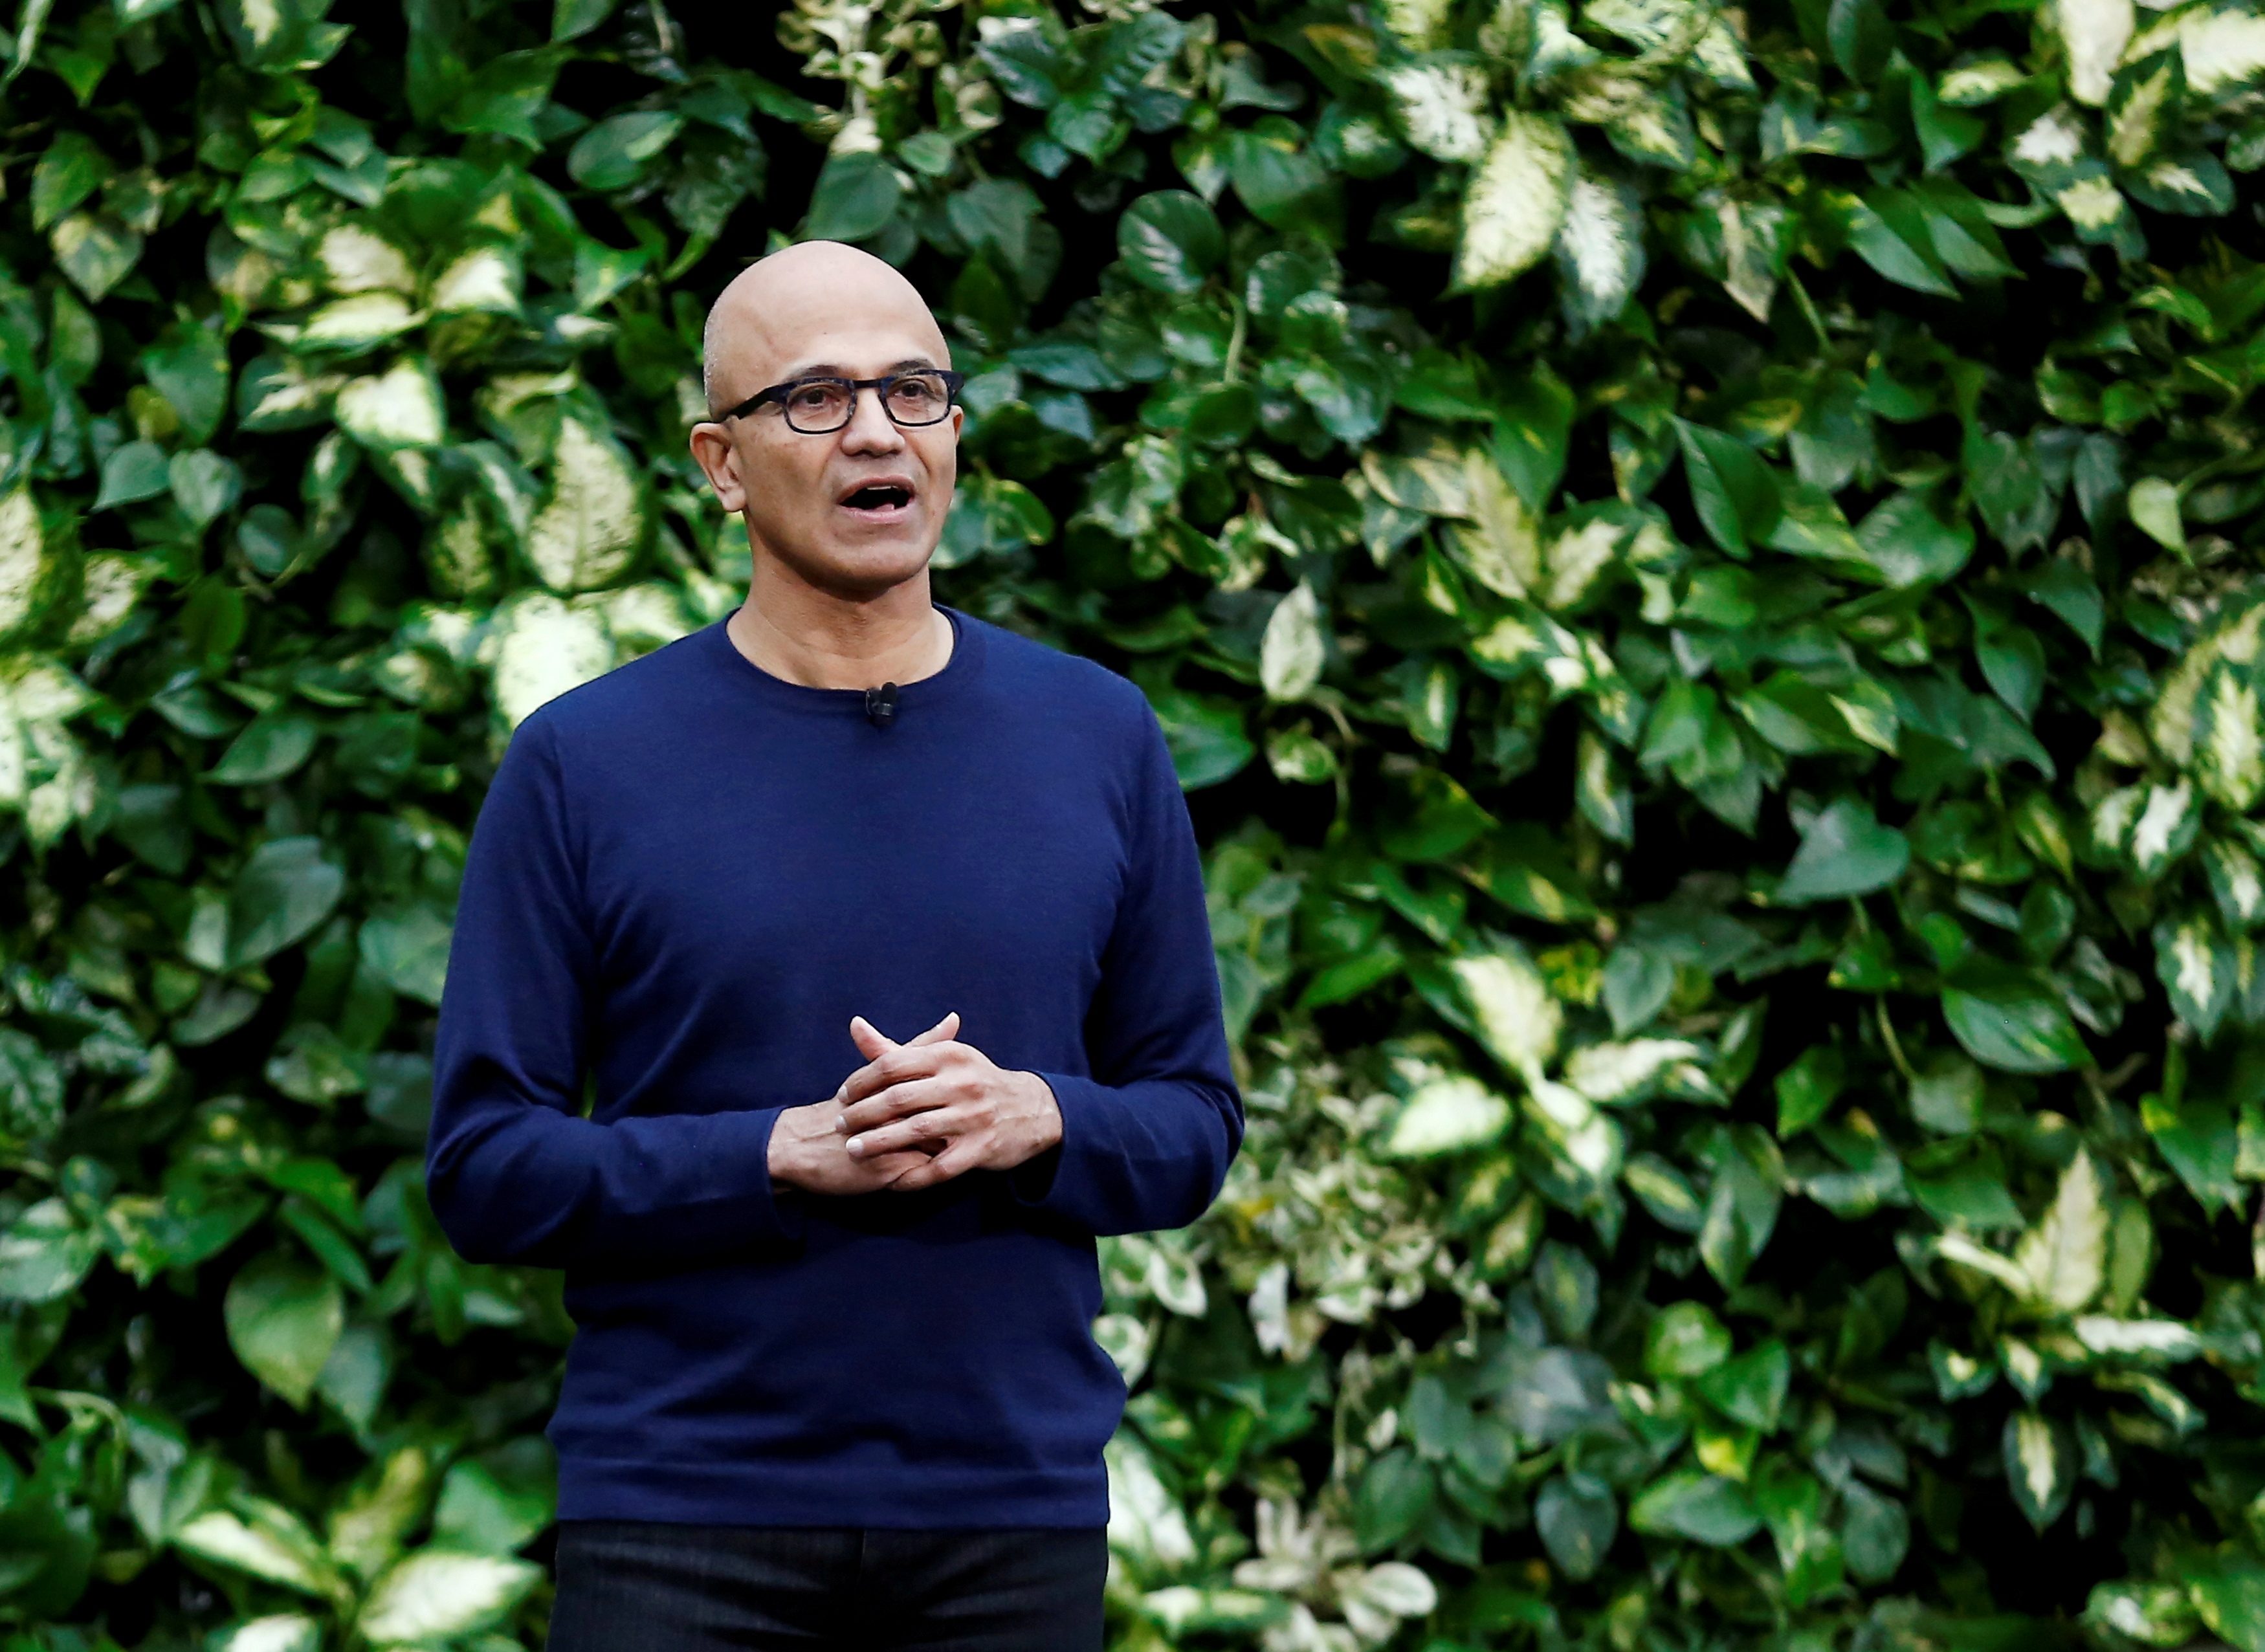 Microsoft CEO says failed TikTok deal ‘strangest thing I’ve worked on’